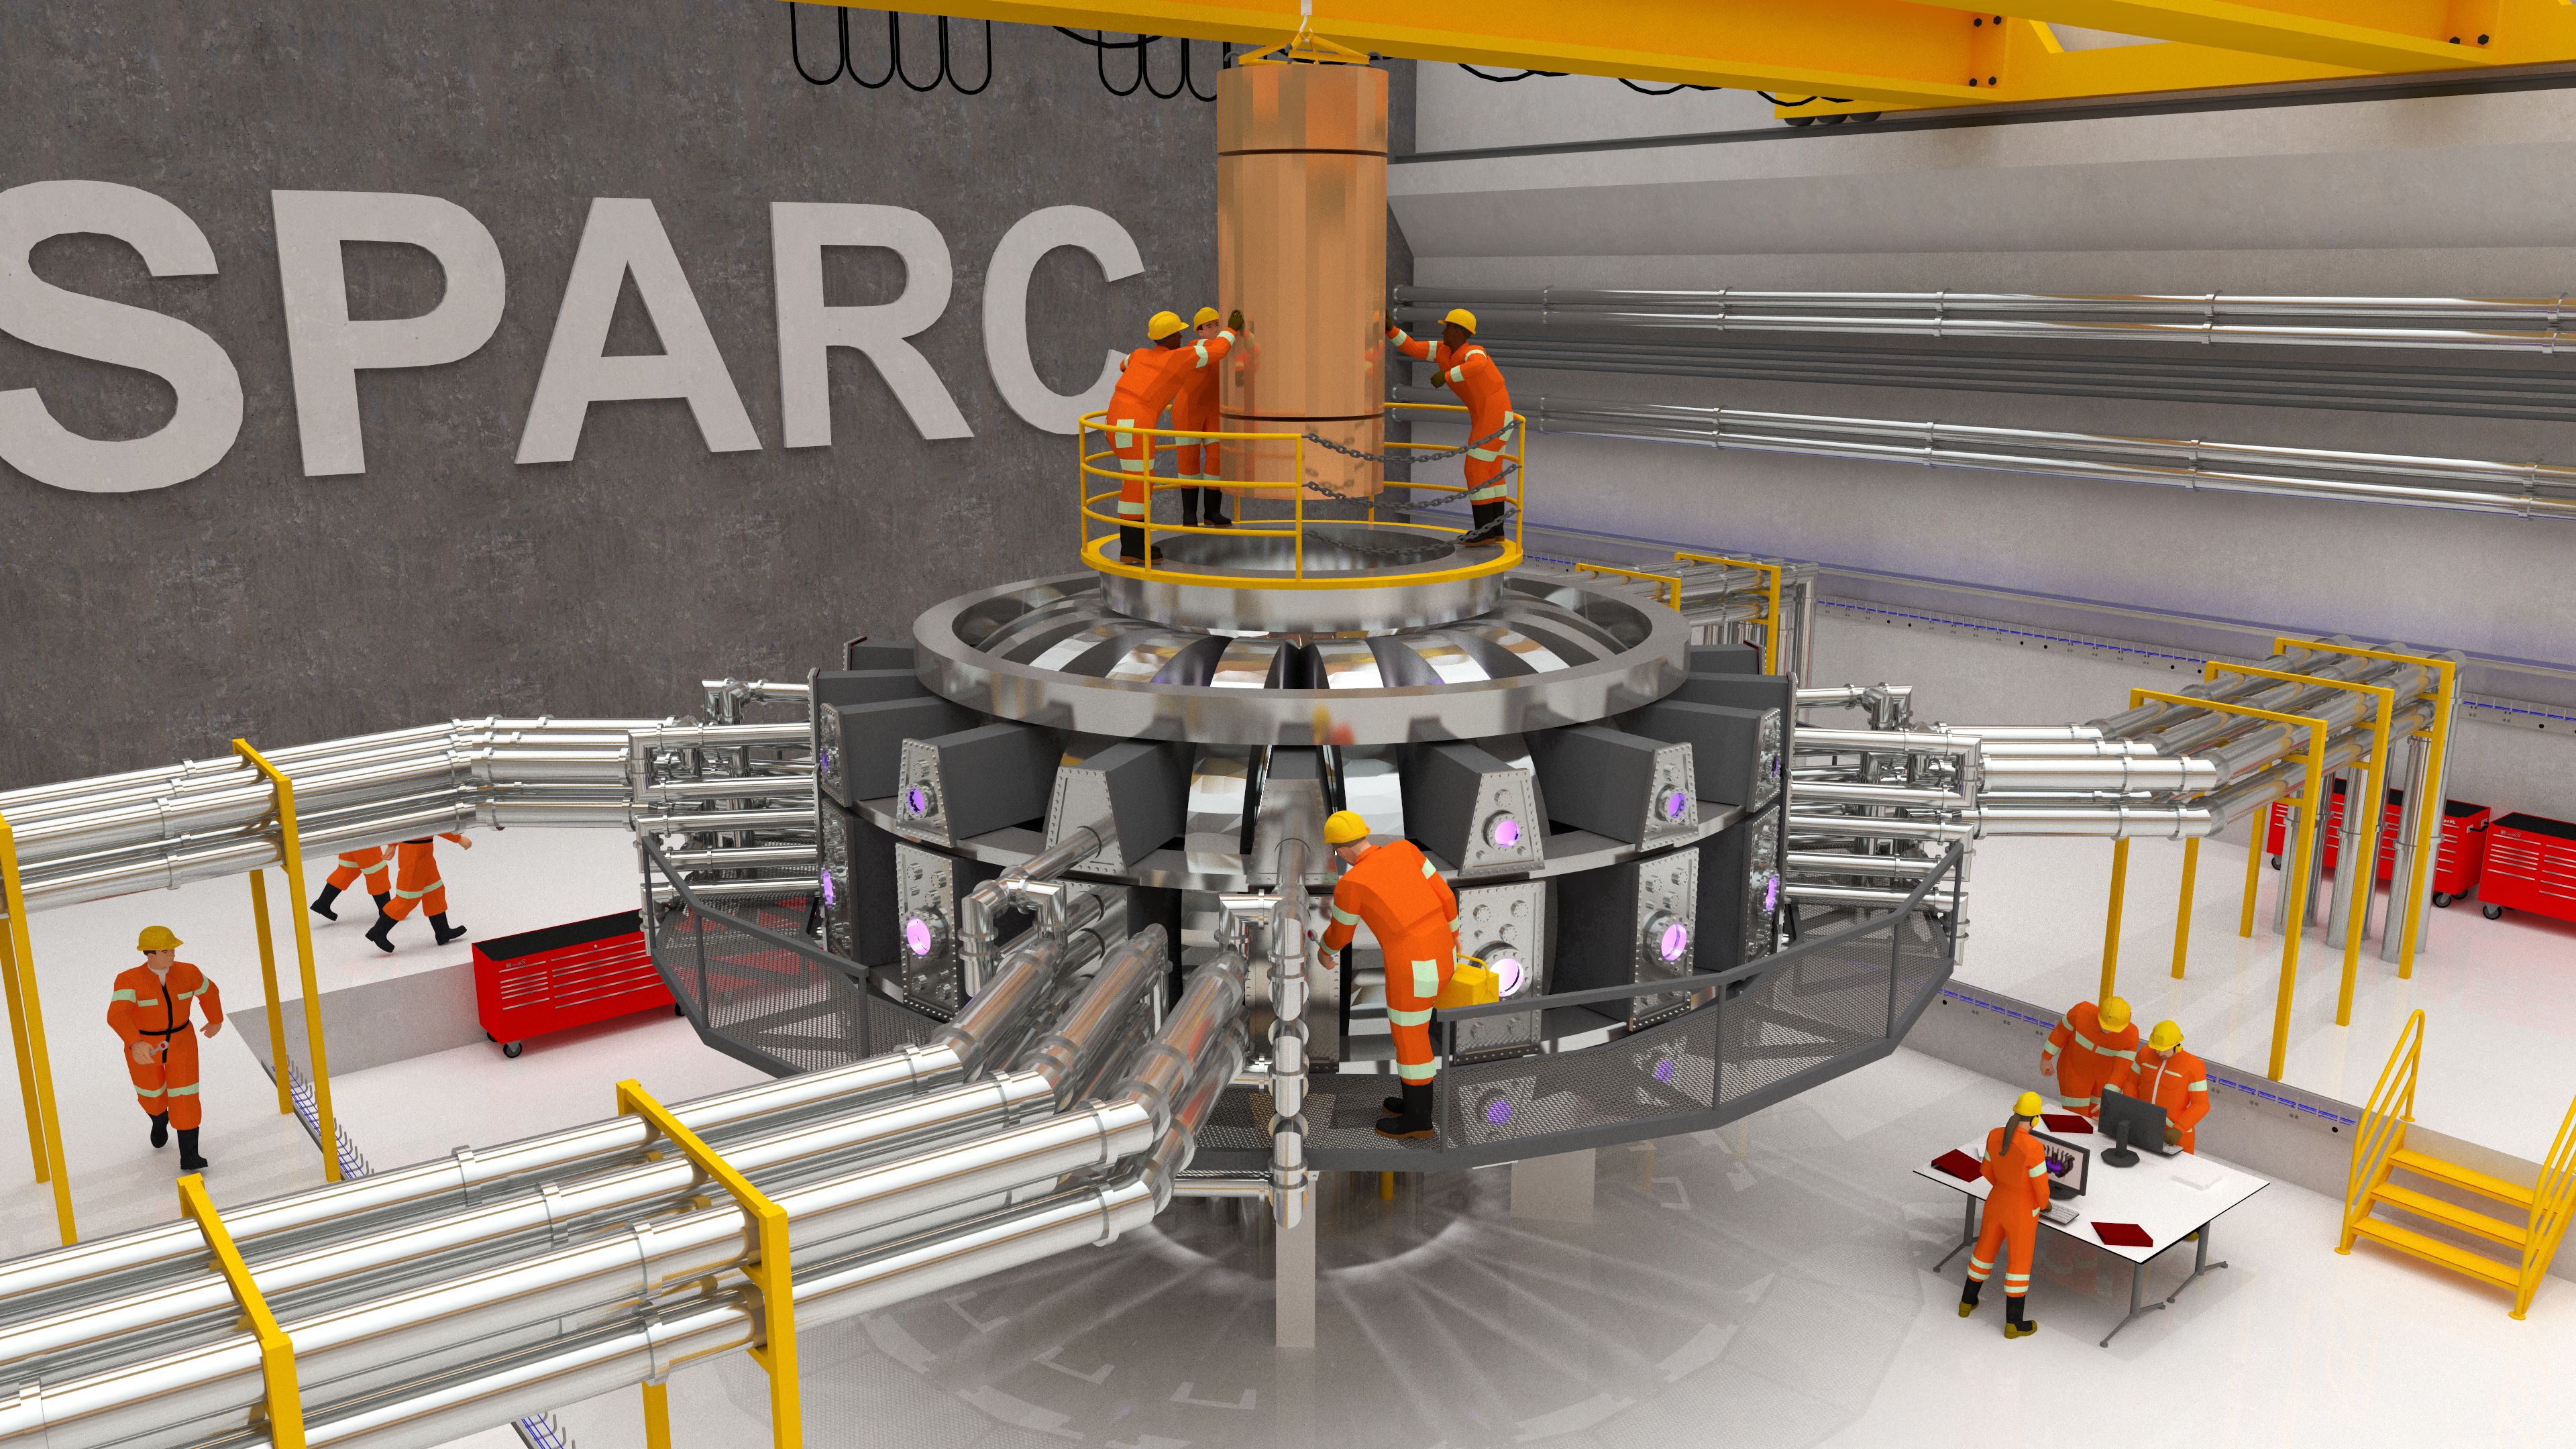 mit-and-newly-formed-company-launch-novel-approach-to-fusion-power